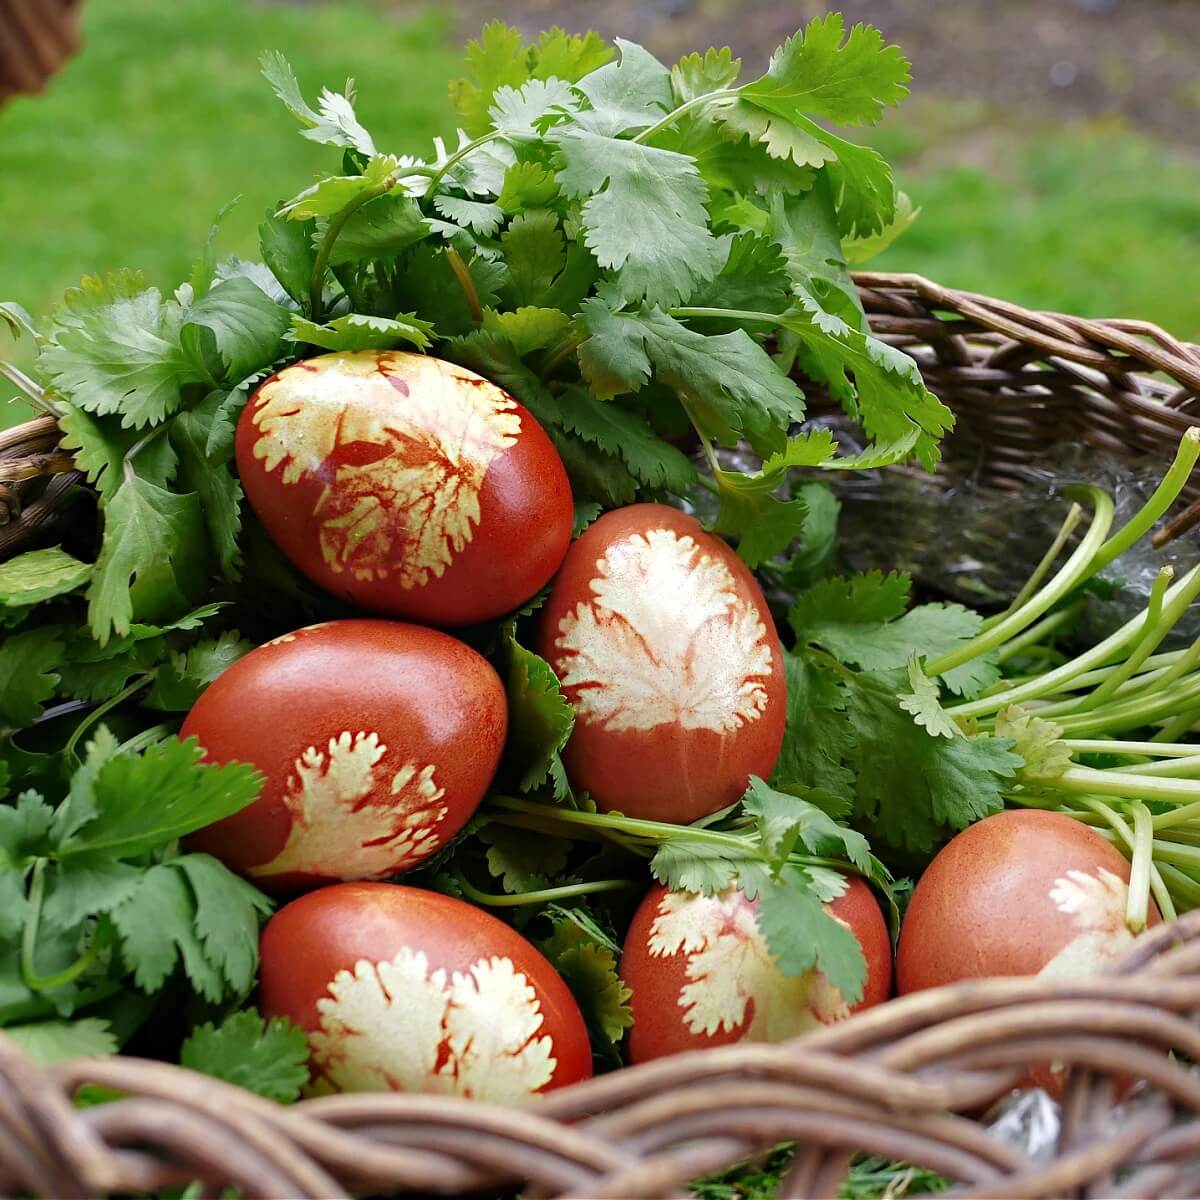 Armenian easter eggs dyed with onion skins